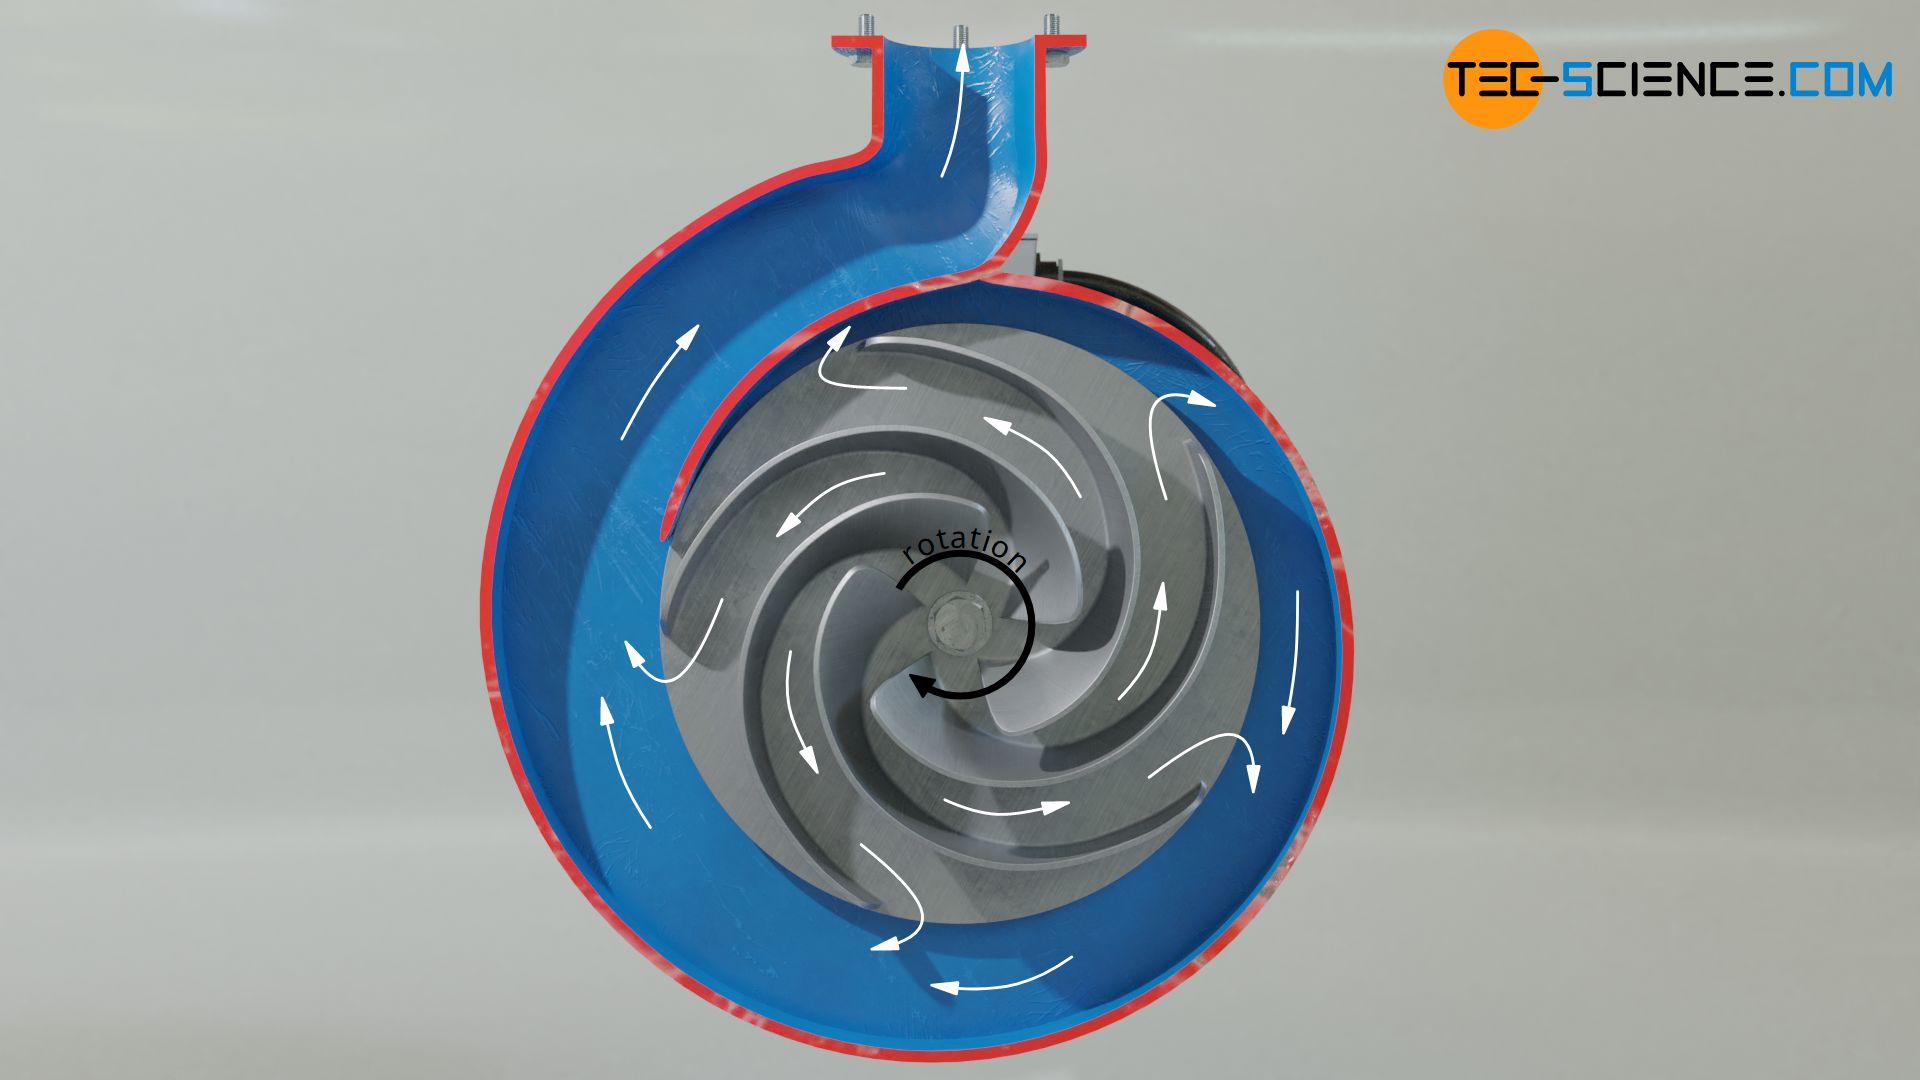 How does a centrifugal pump work? - tec-science